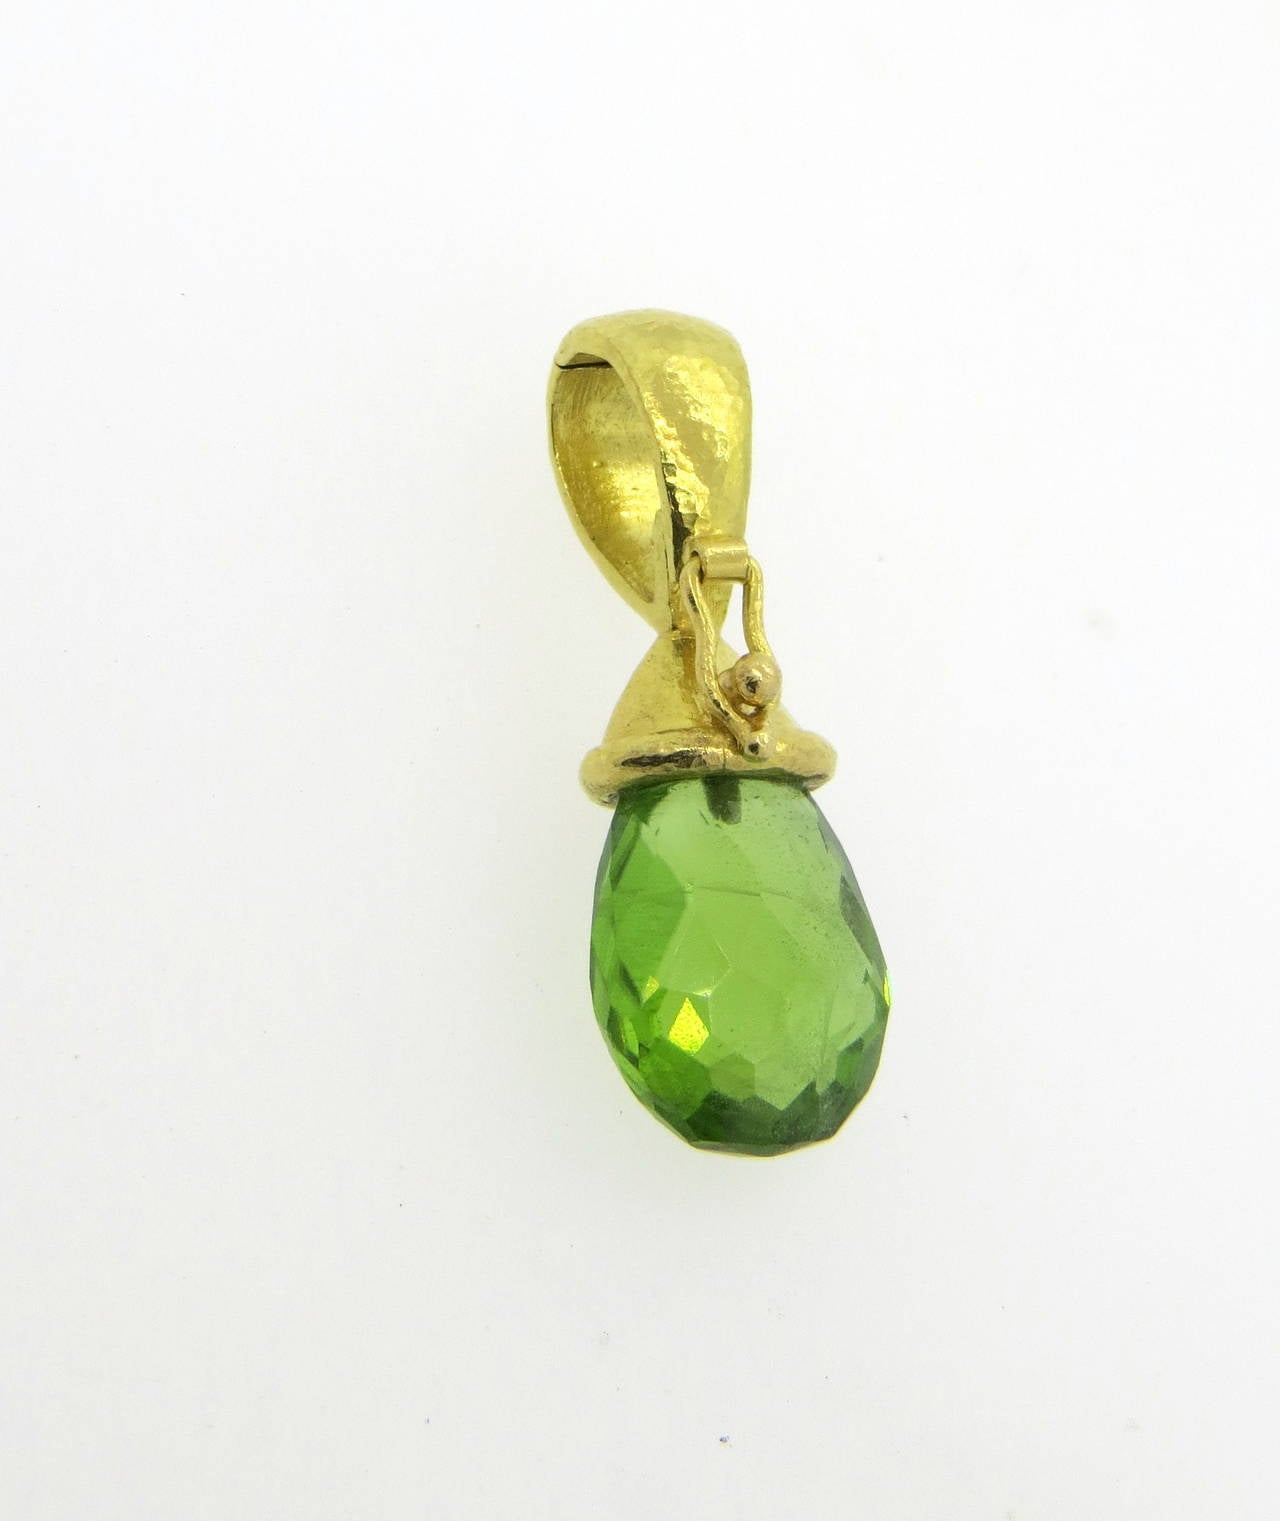 An 18k yellow gold pendant set with a faceted peridot.  Crafted by Elizabeth Locke, the pendant measures 31mm x 11mm and weighs 5.7 grams.